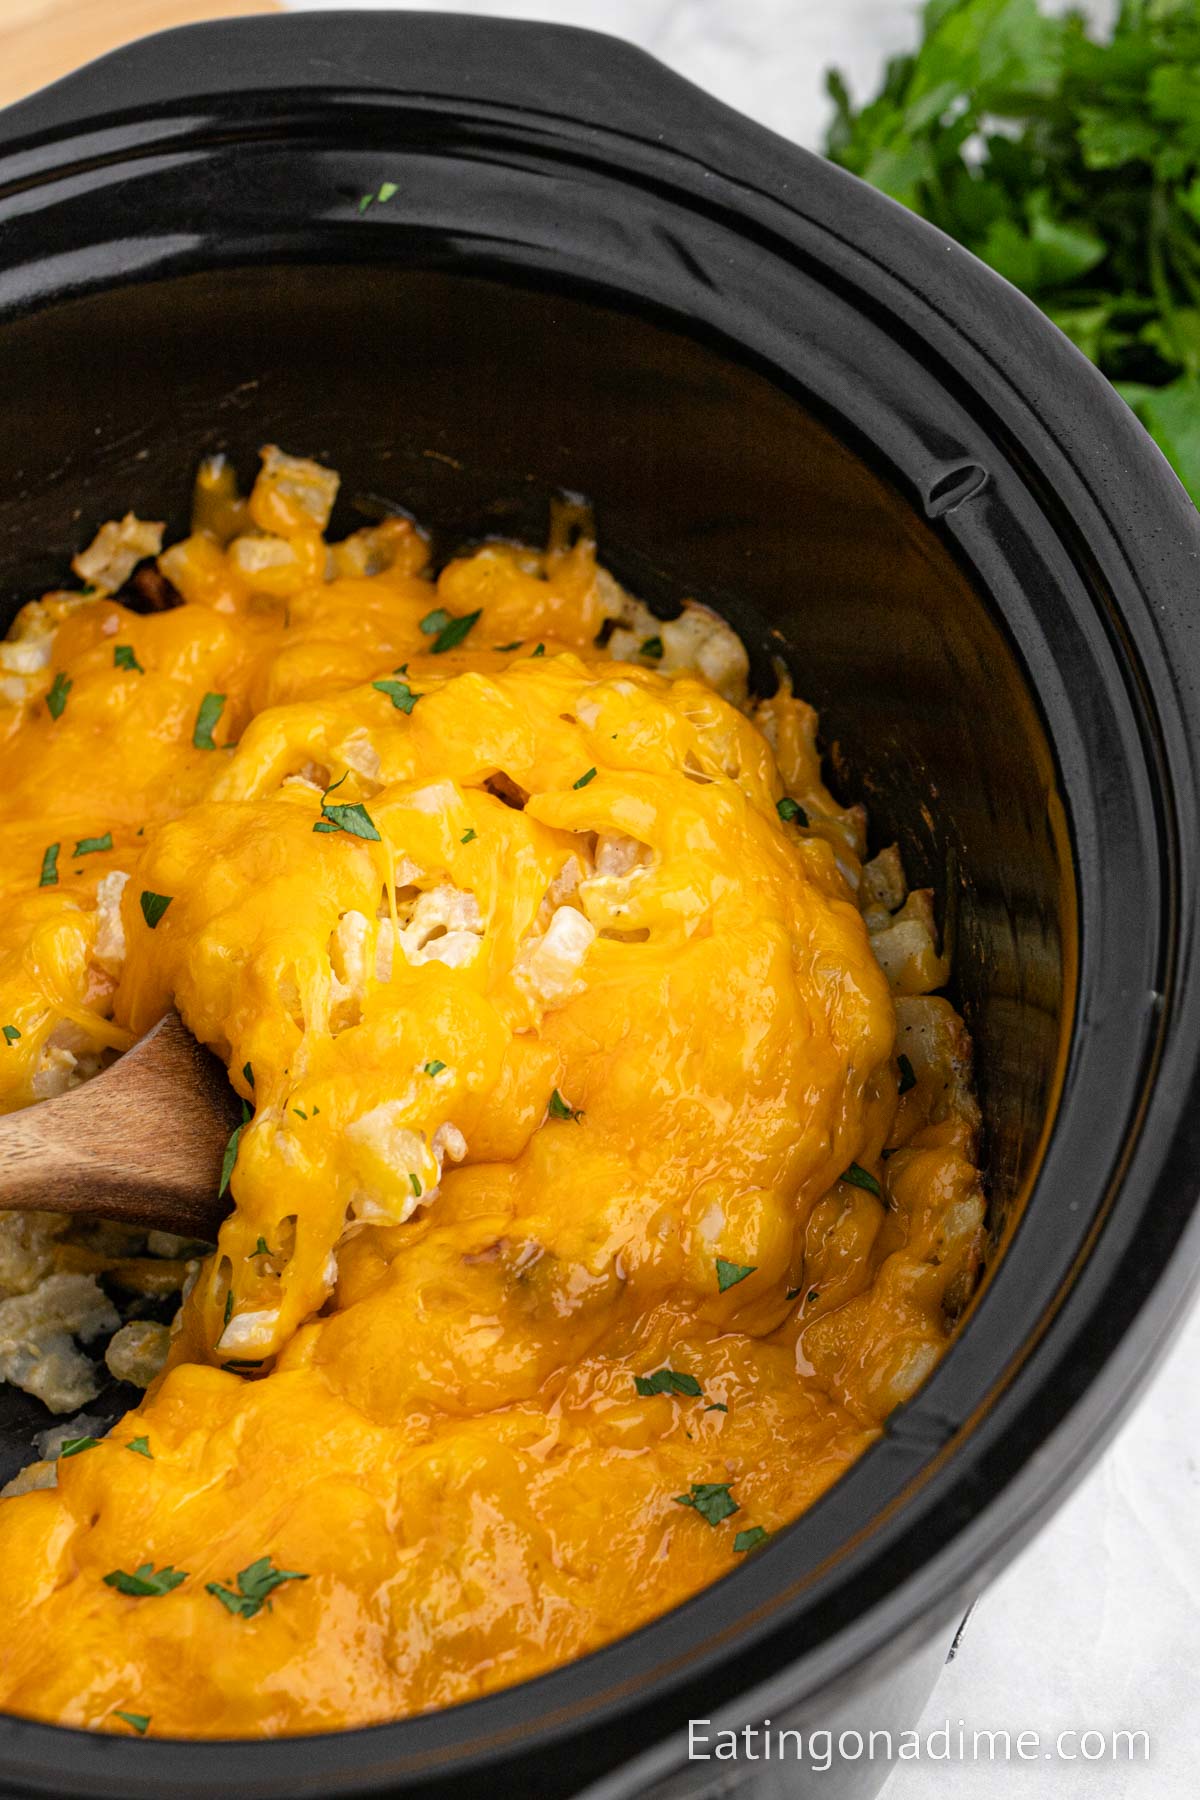 Funeral potatoes in a slow cooker with a wooden spoon